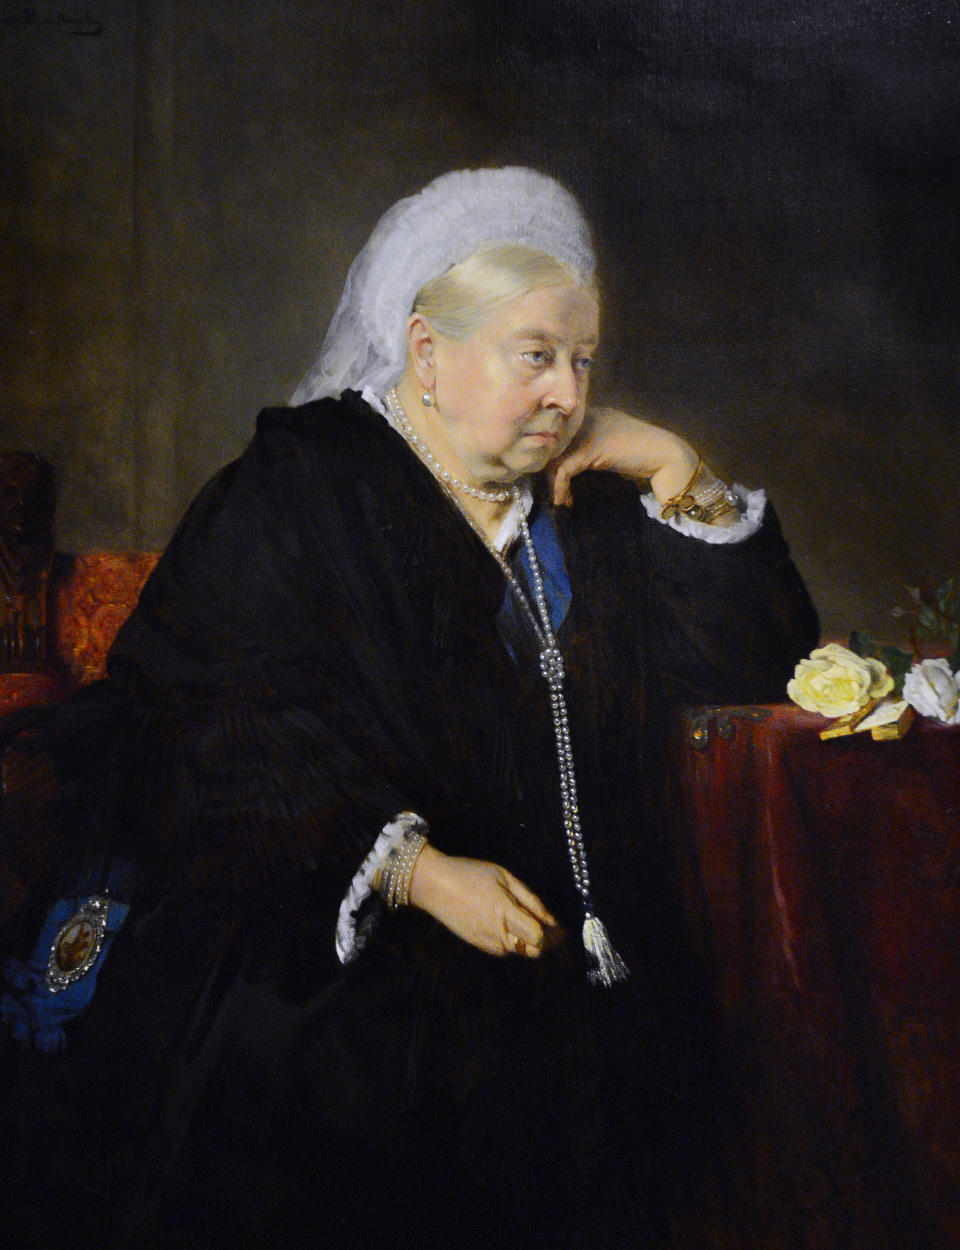 A portrait of Queen Victoria of England (1819-1901) painted in 1900 by Bertha Muller is on display at the National Portrait Gallery in London, England.  The painting shows the Queen nearing the end of her long reign and wearing the blue sash of the Order of the Garter.  (Photo by Robert Alexander/Getty Images)